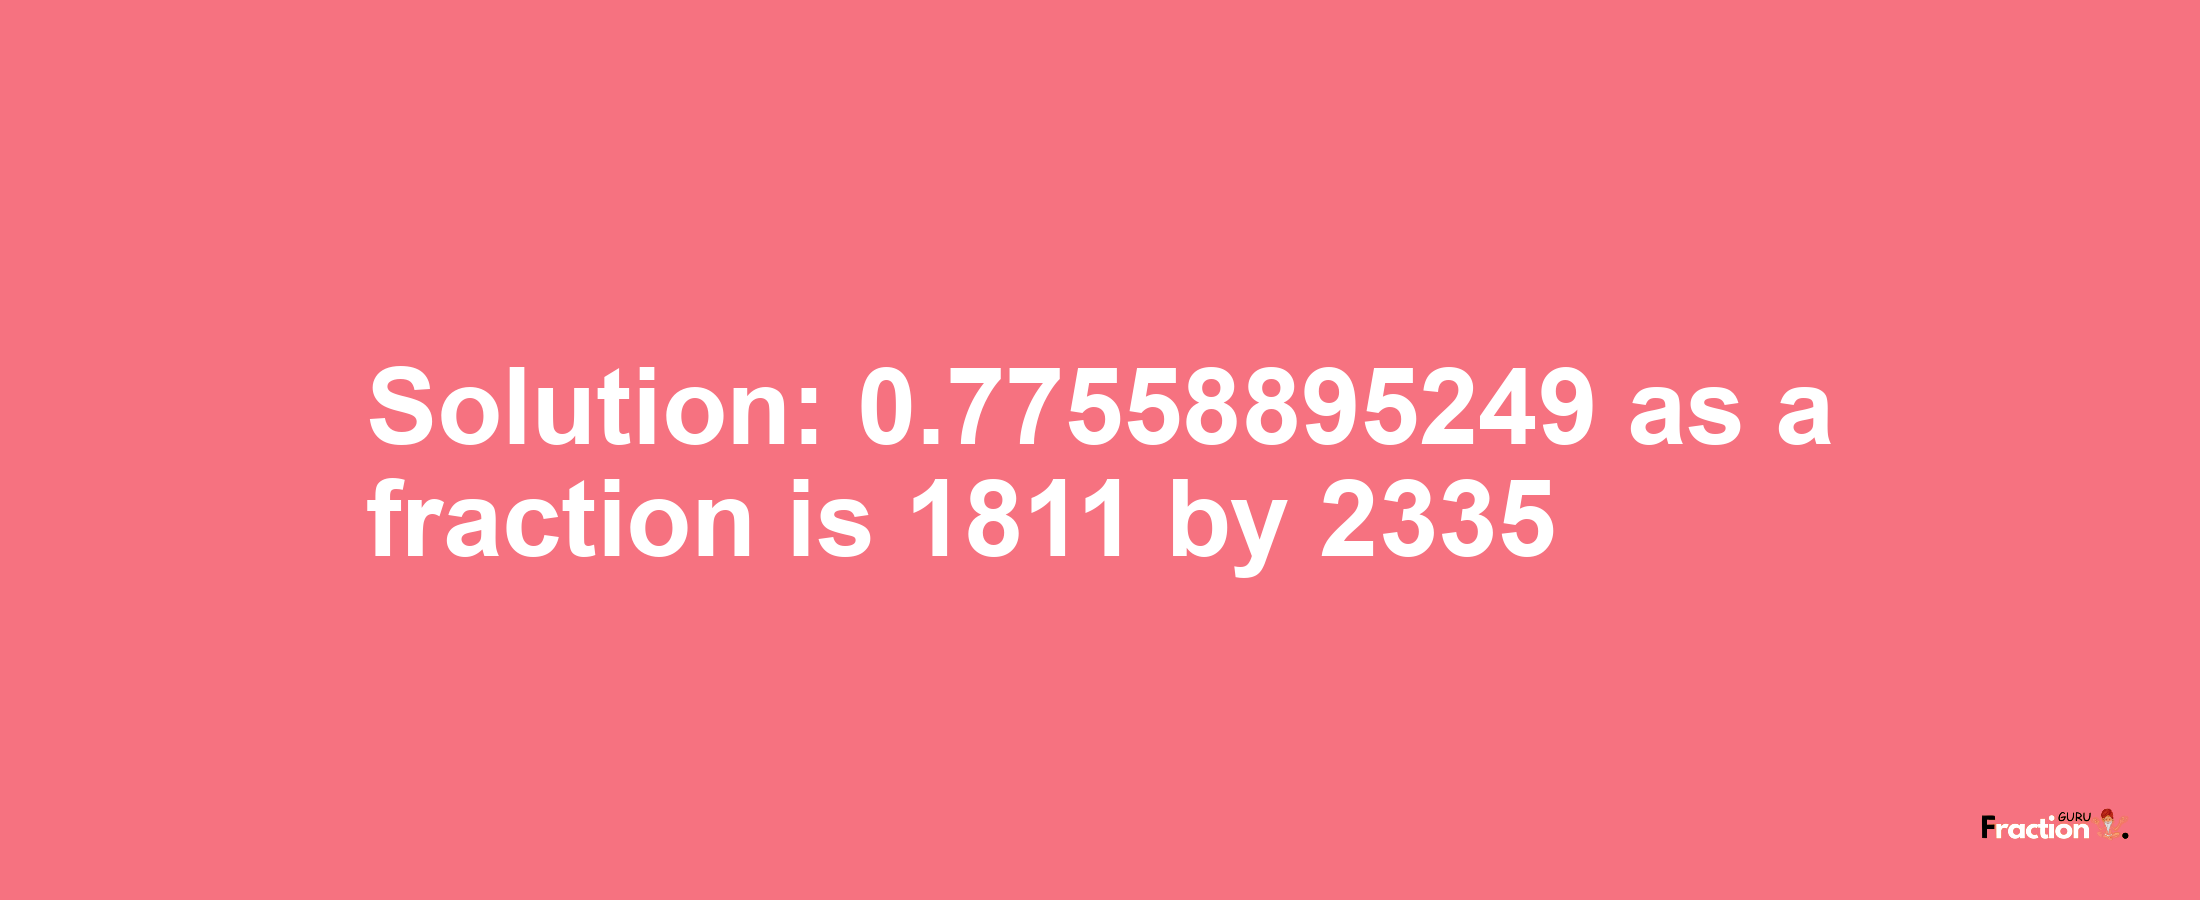 Solution:0.77558895249 as a fraction is 1811/2335